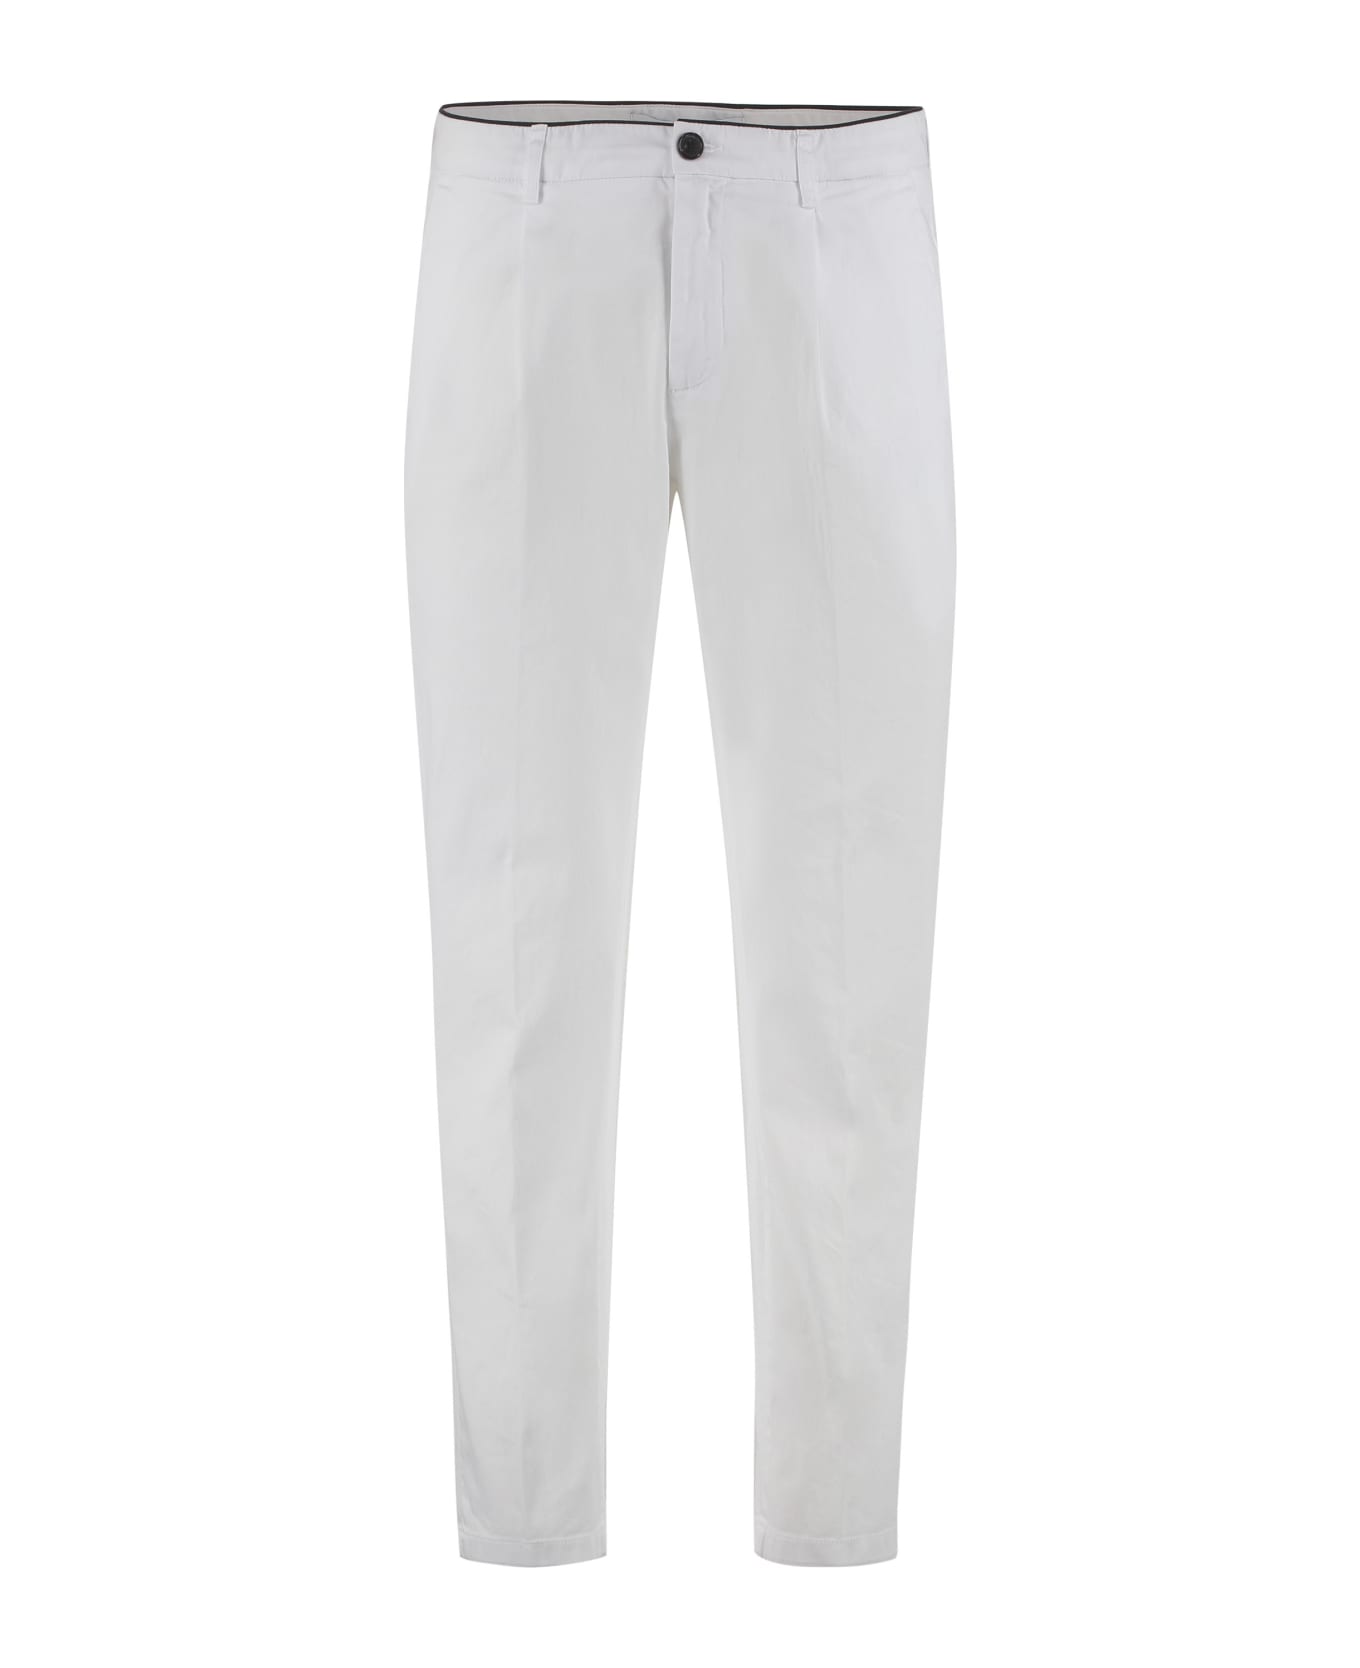 Department Five Prince Chino Pants - White ボトムス